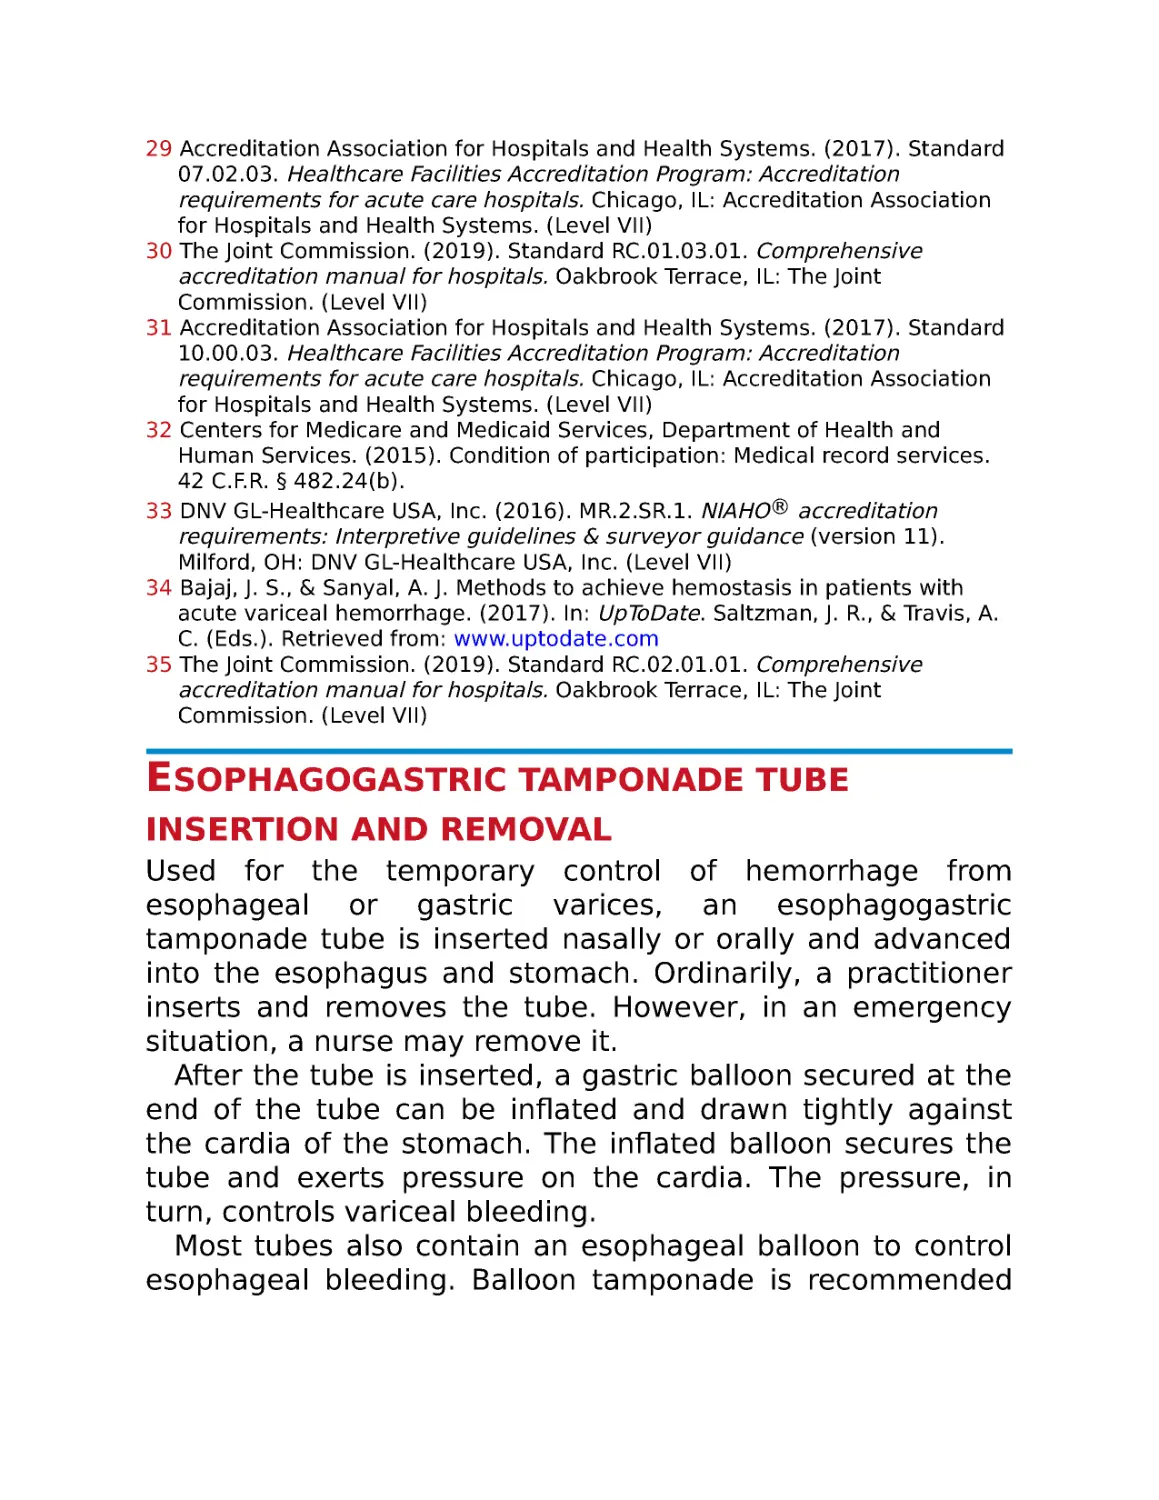 Esophagogastric tamponade tube insertion and removal